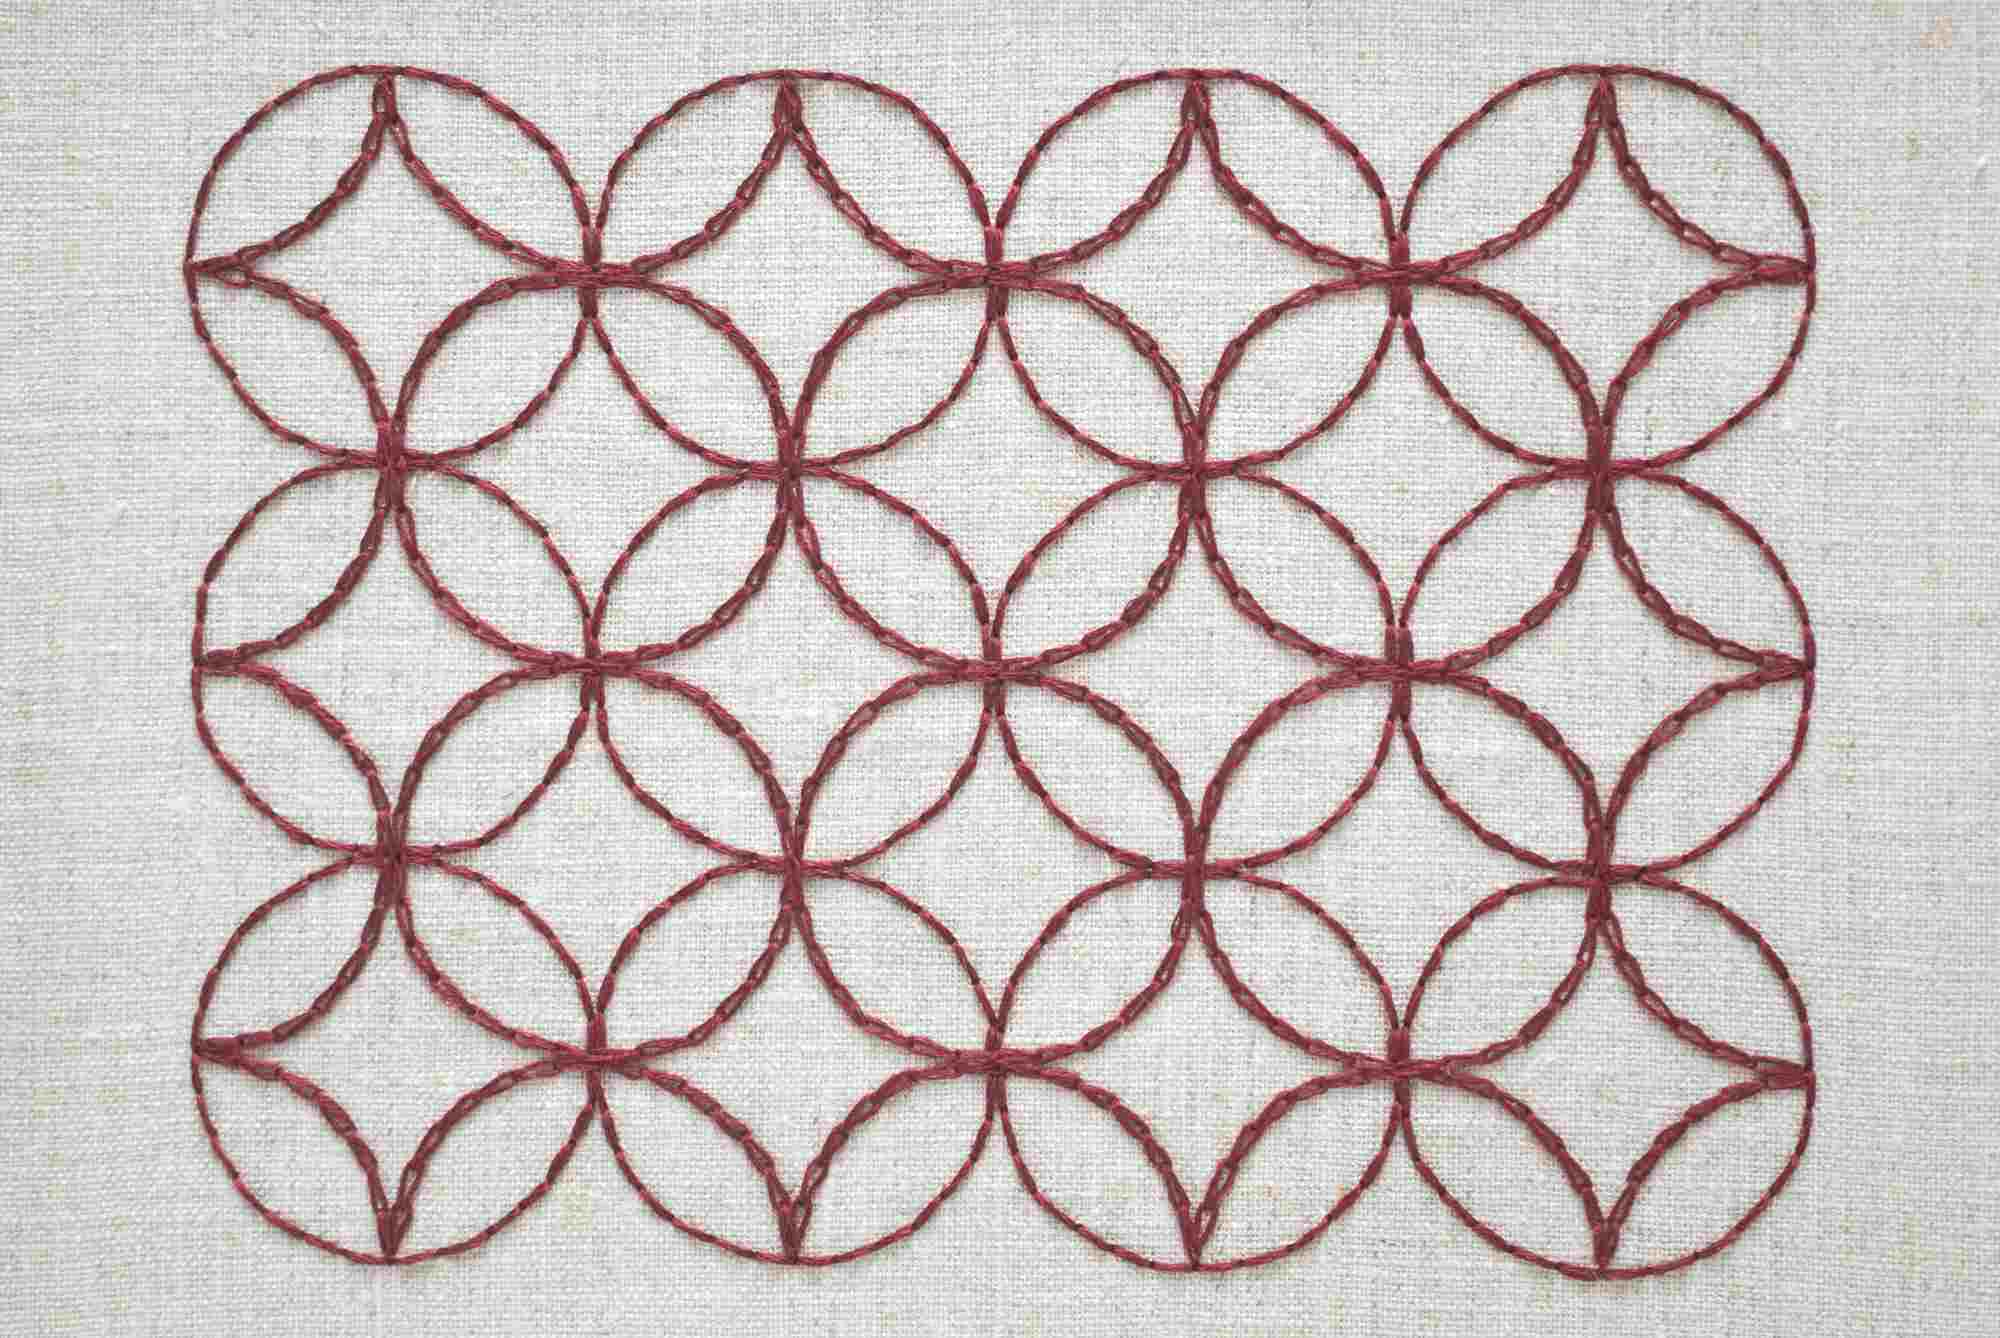 Japanese Embroidery Patterns Free Sashiko Patterns Projects And Resources